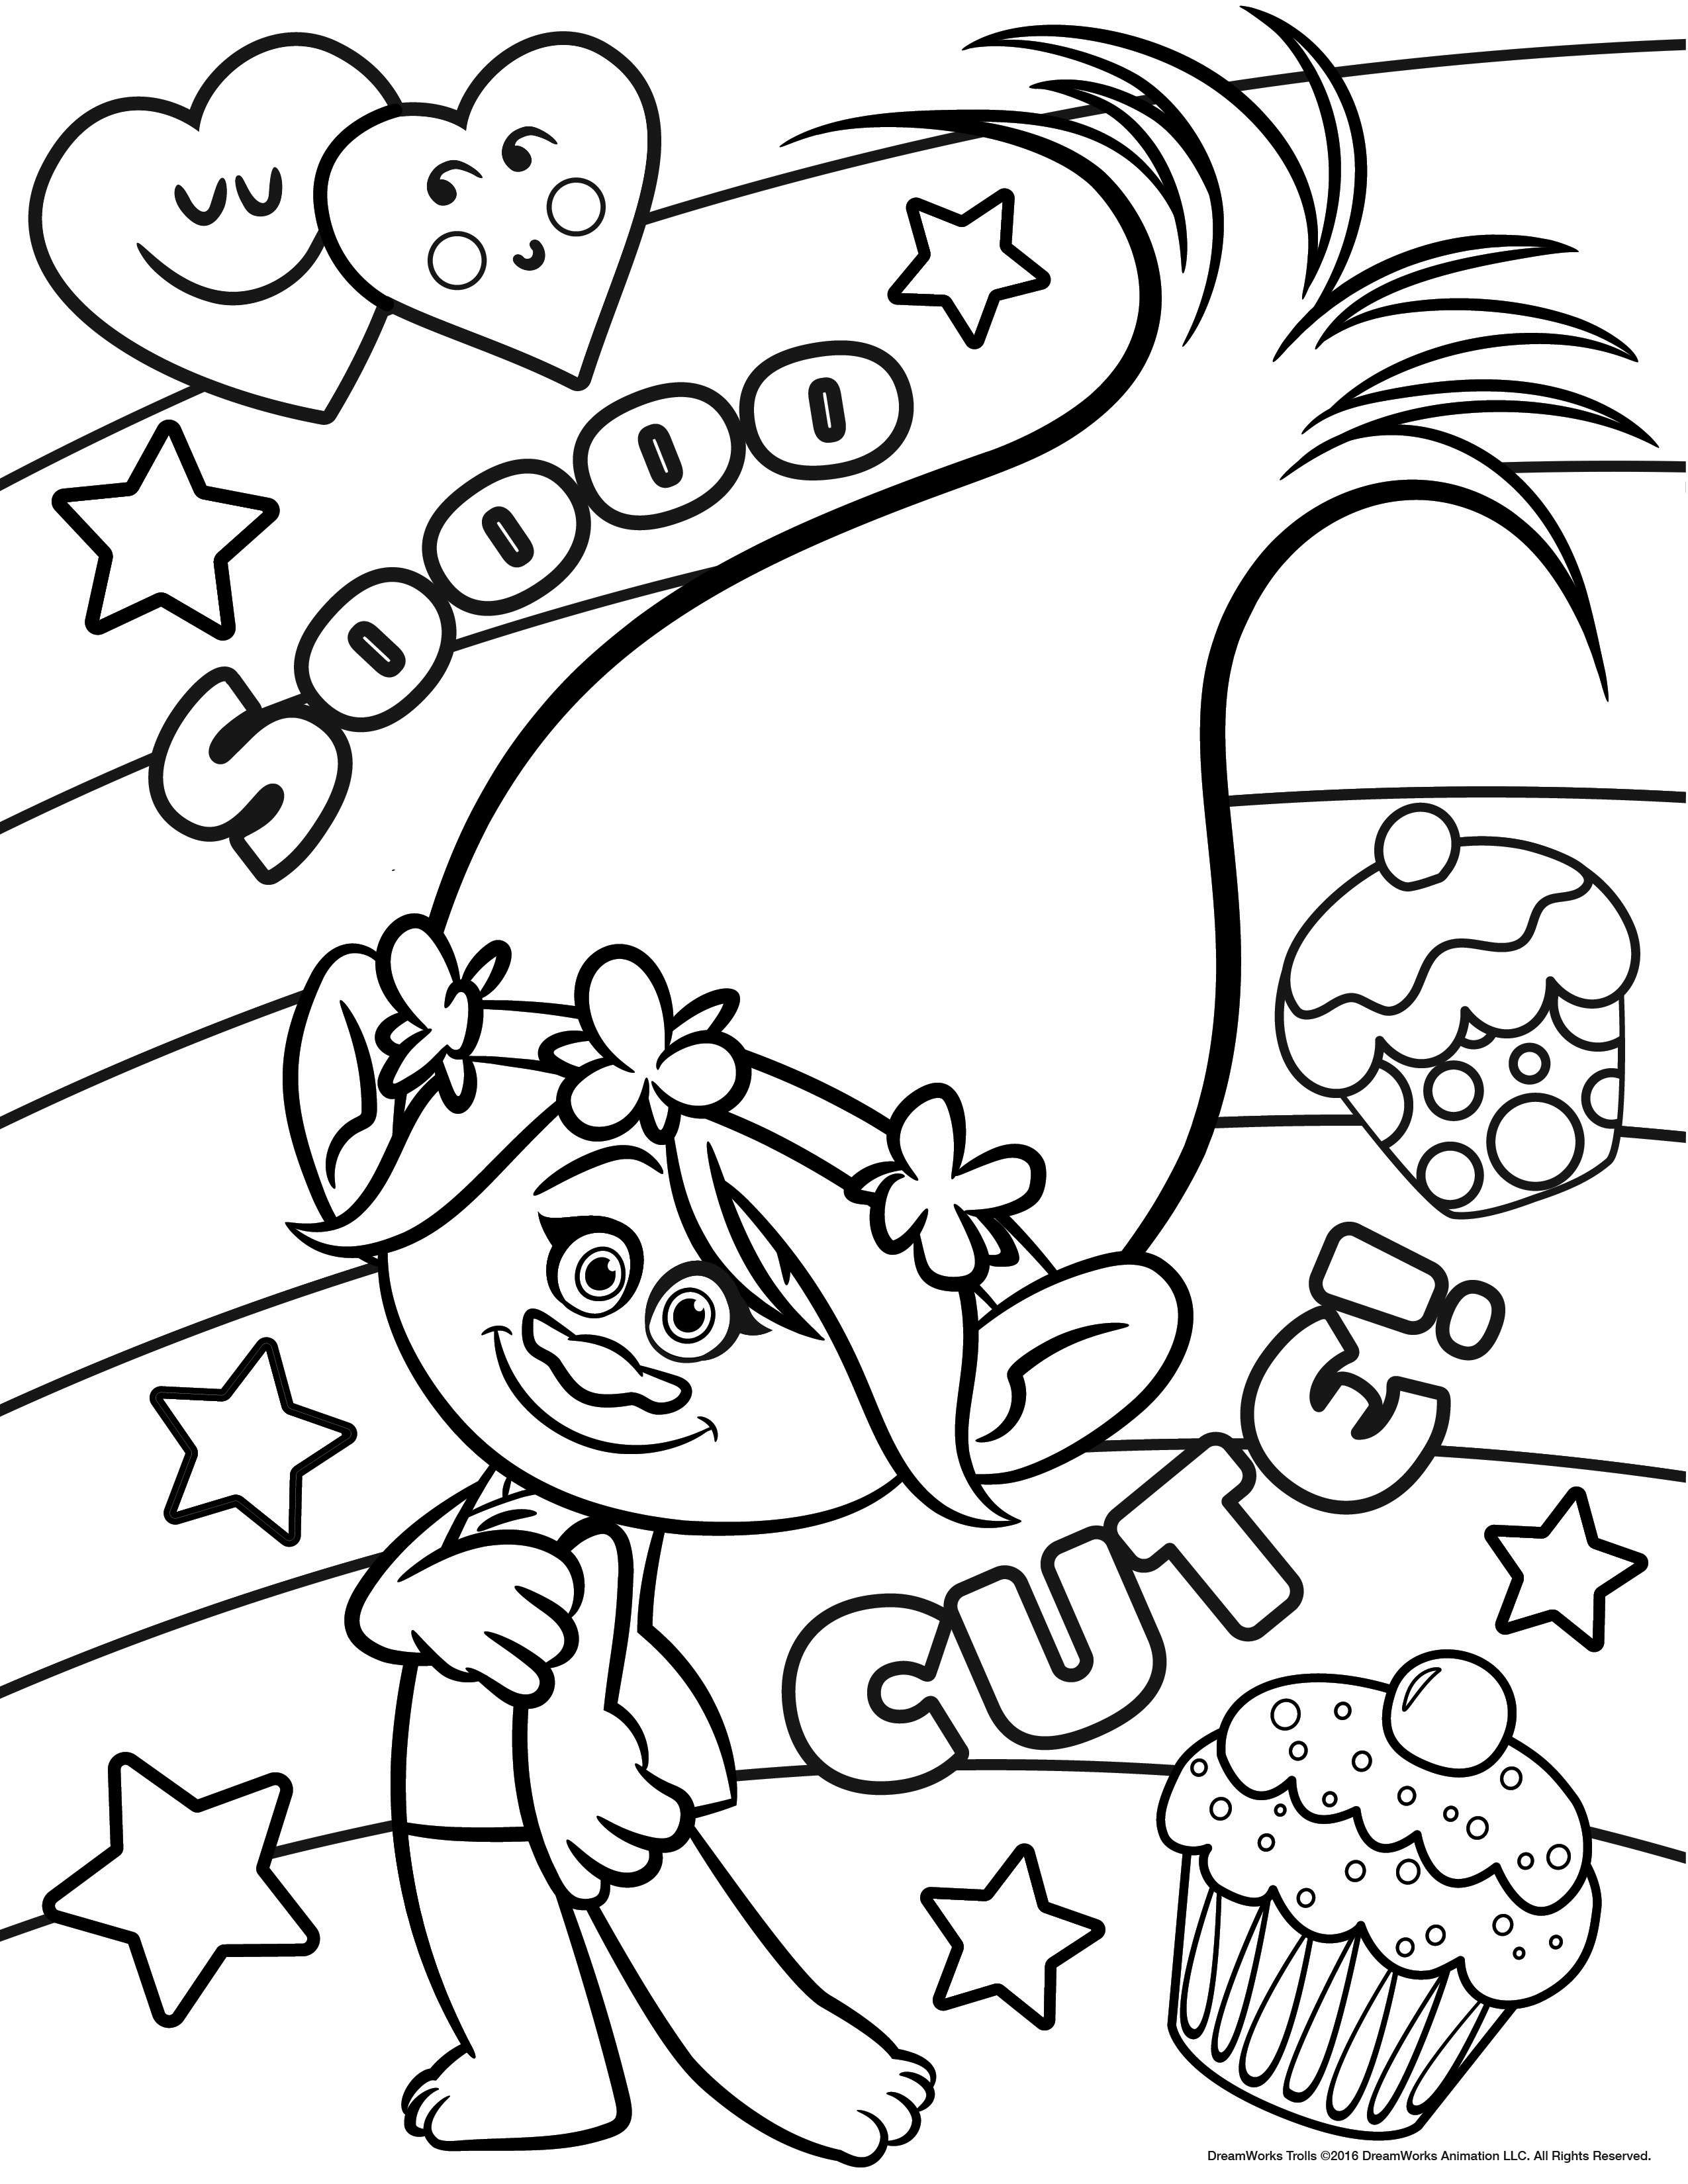 Poppy : so cute ! - Trolls Kids Coloring Pages